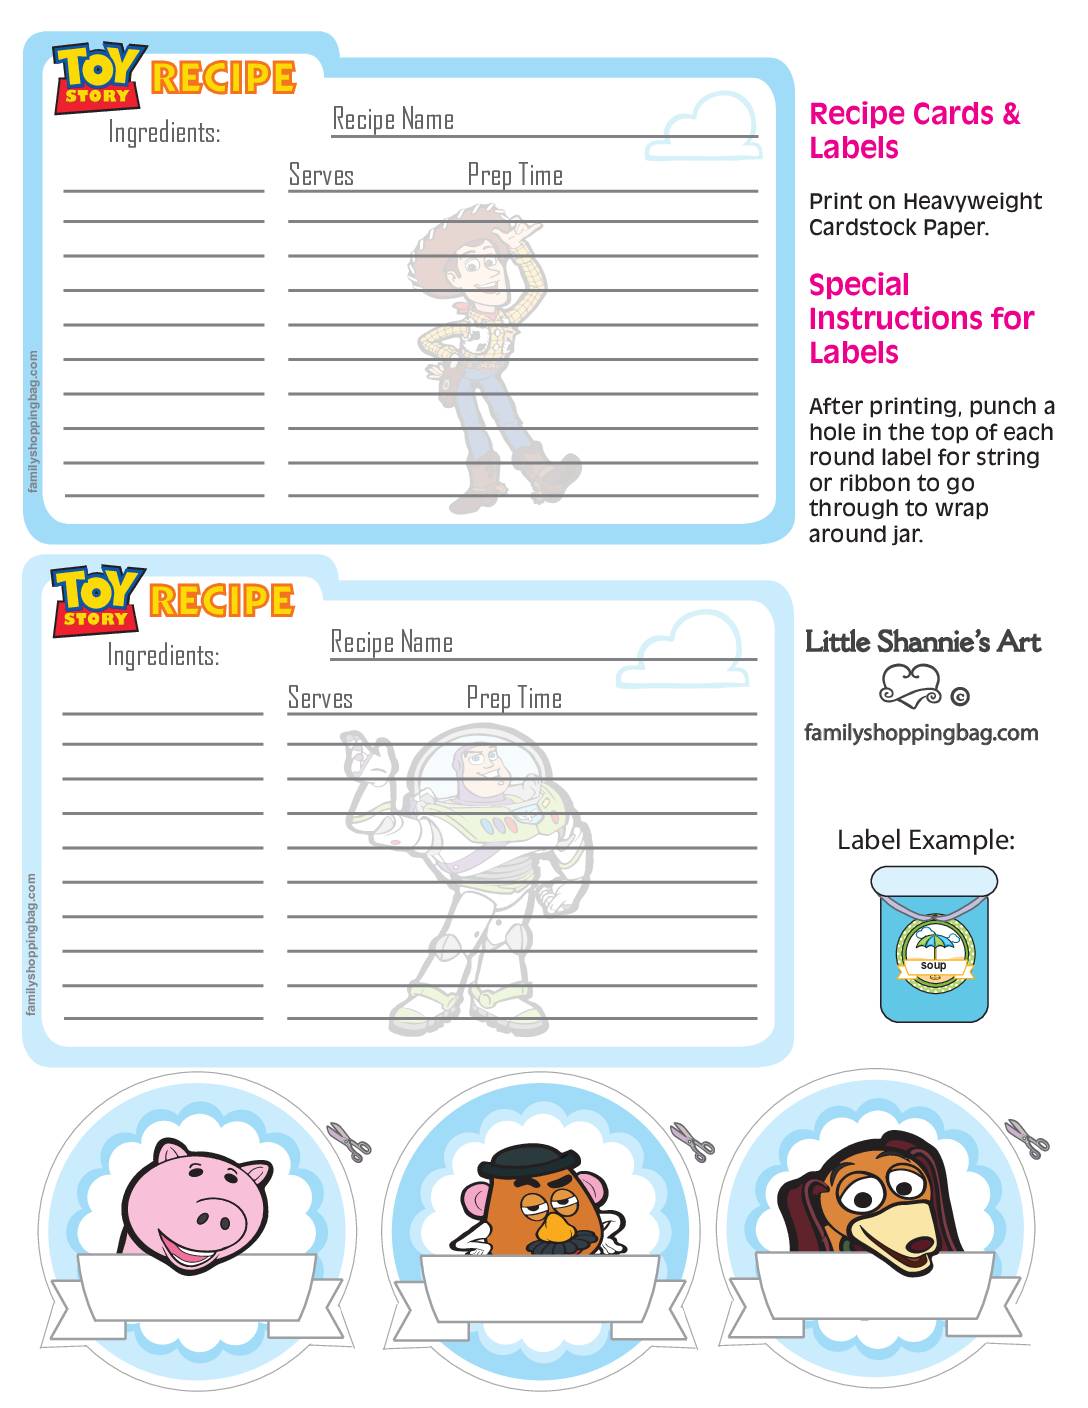 Recipe Cards Toy Story